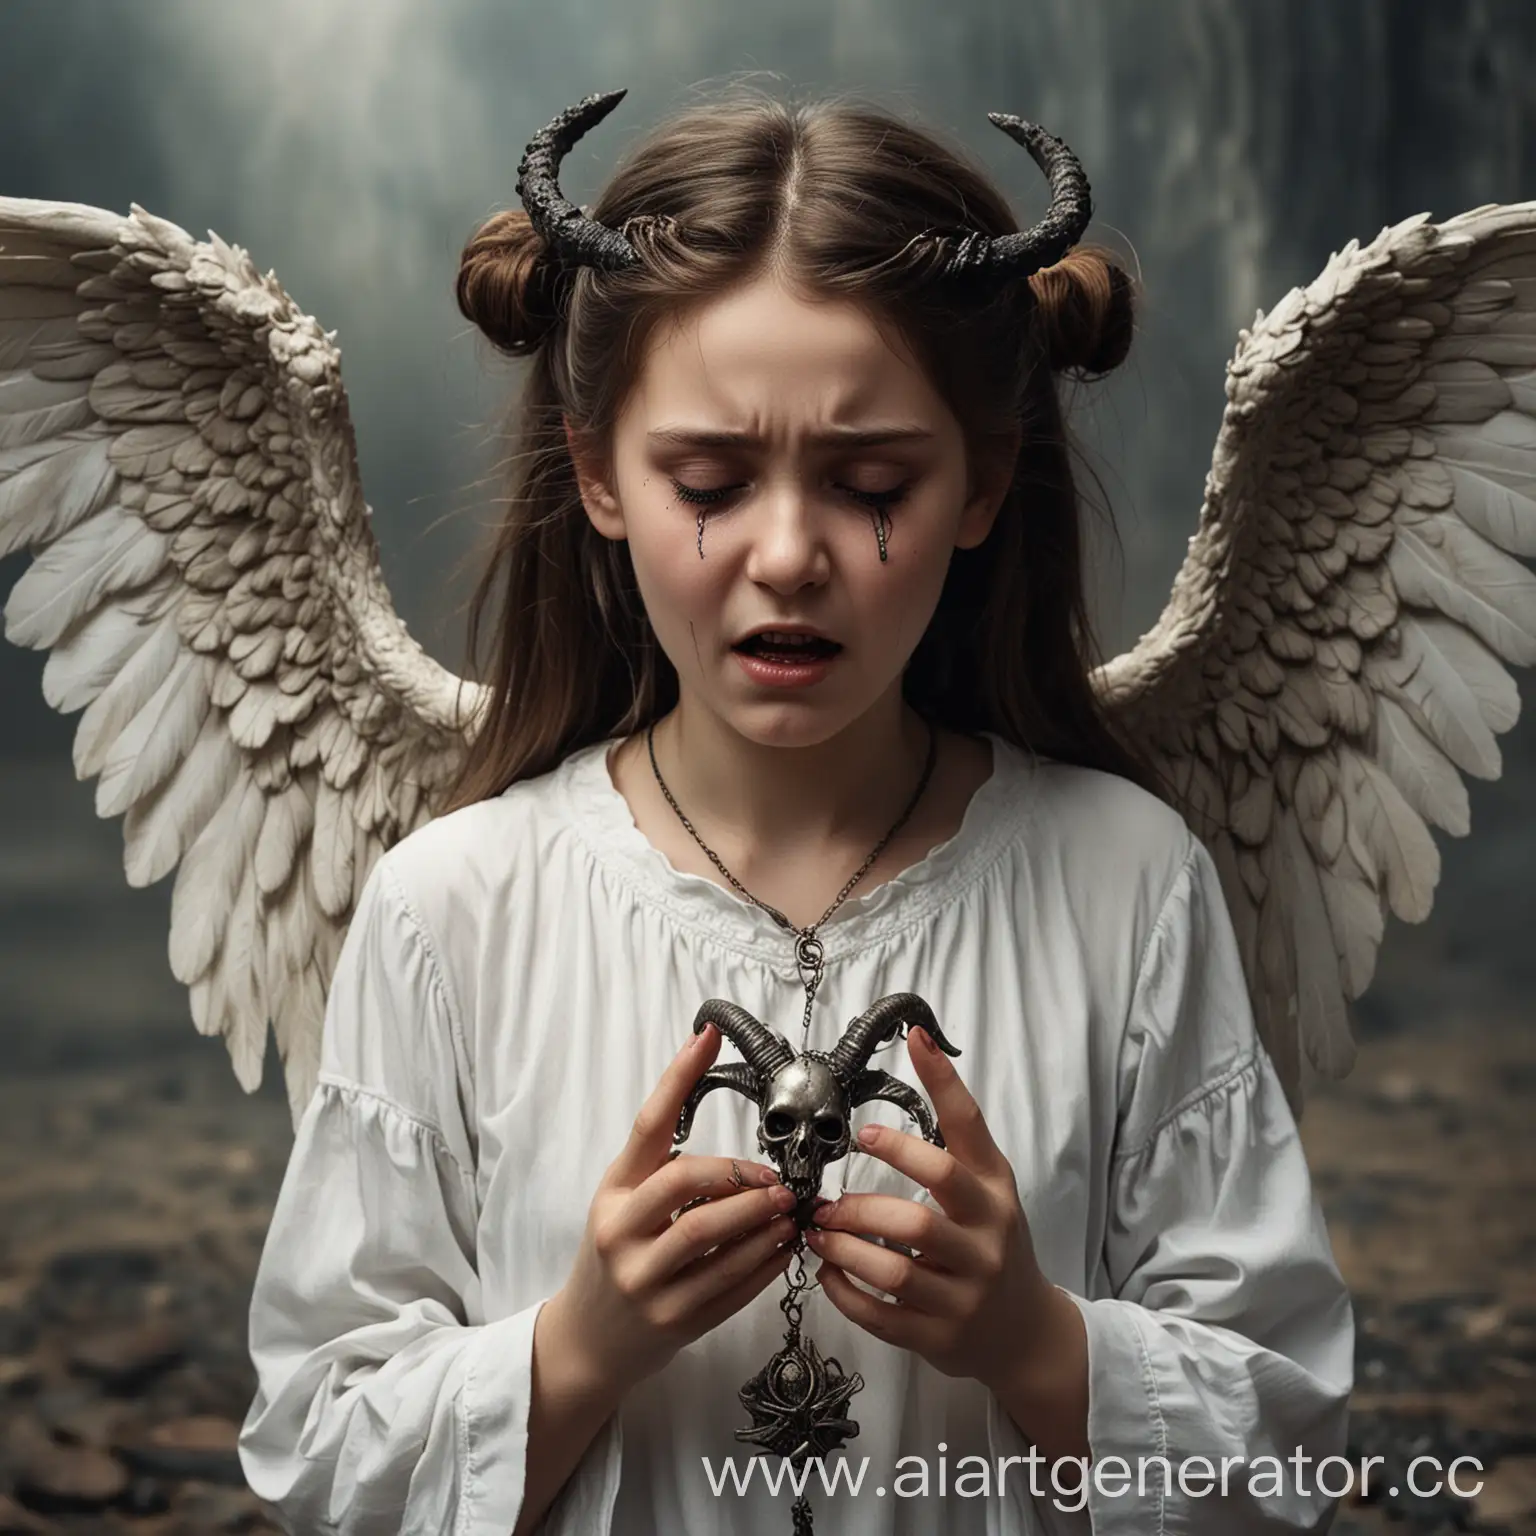 Crying-Fallen-Angel-Girl-Clutching-Amulet